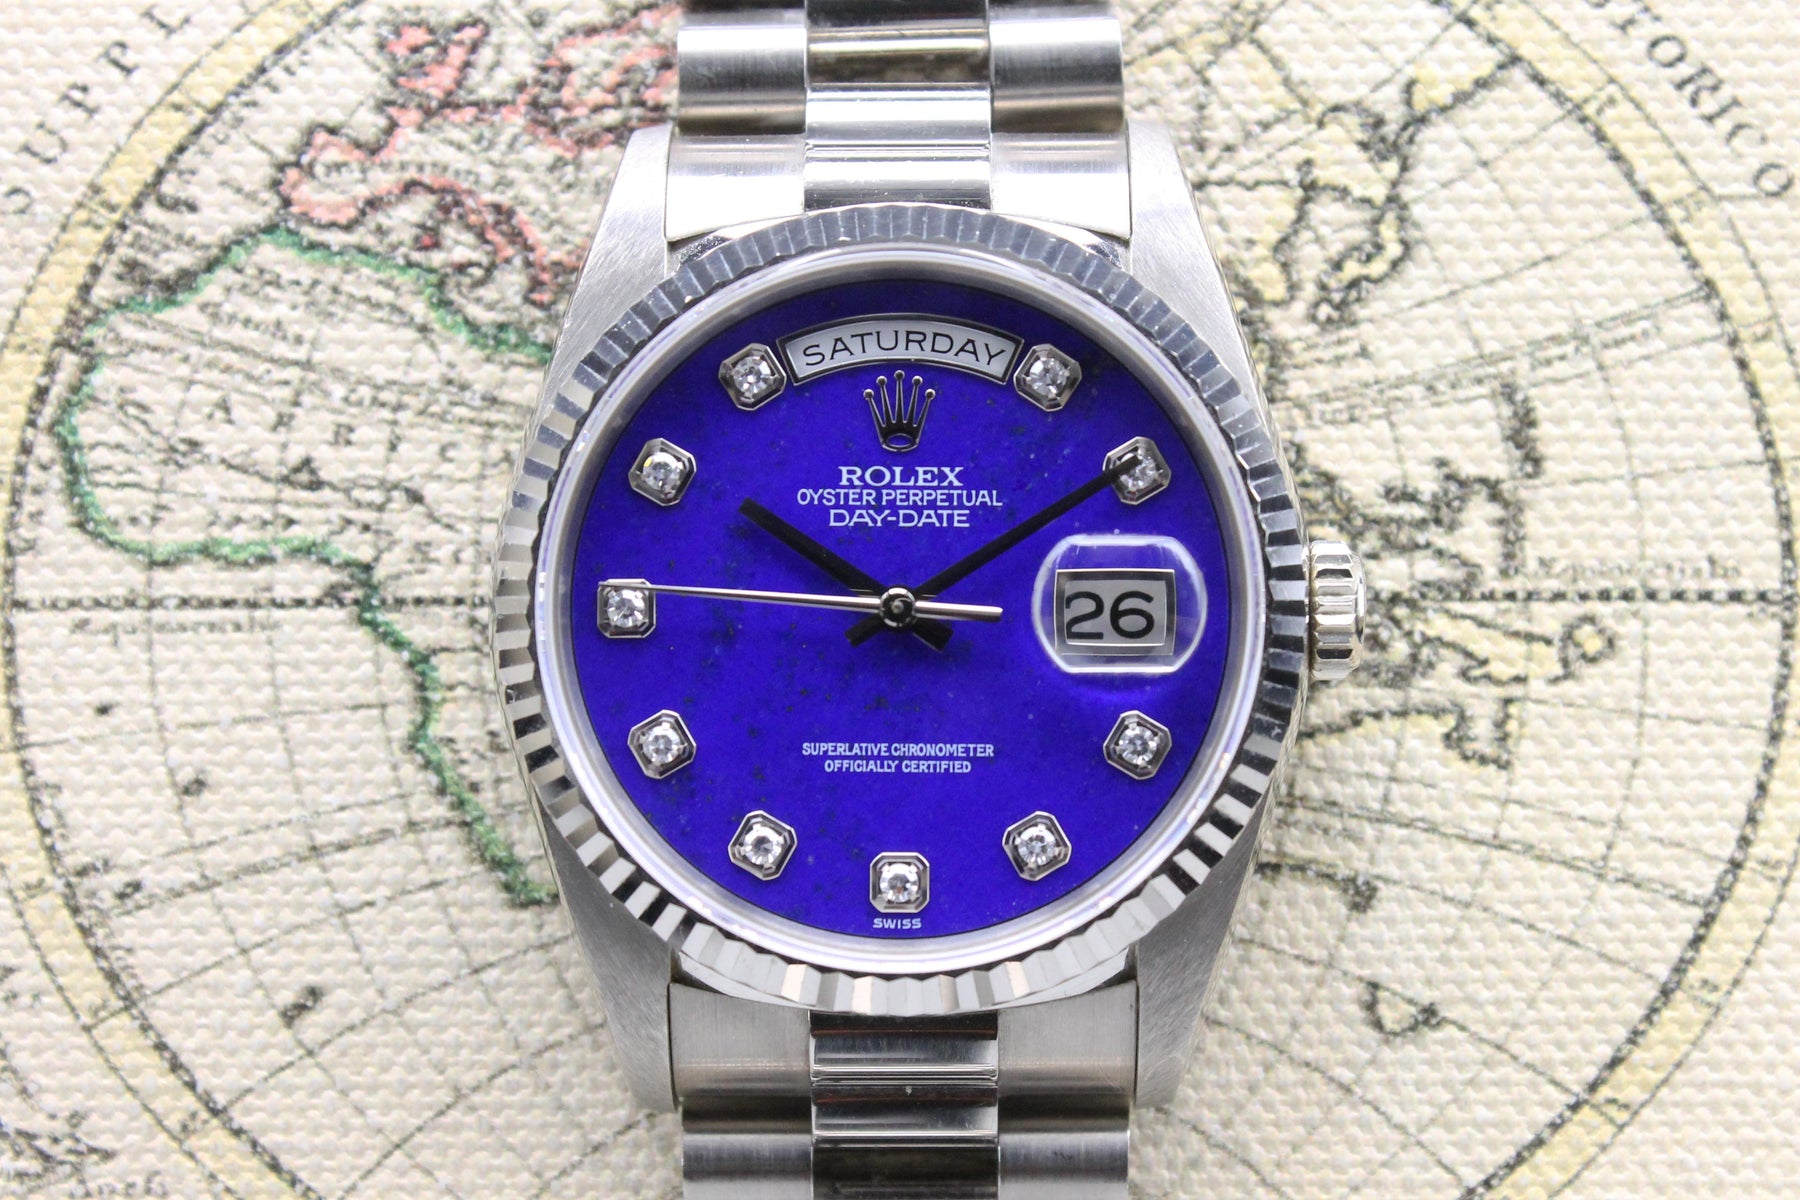 1991 Rolex Day Date WG Blue Lapis Diamond Dial 'The Iceberg' Ref. 18239 (with Certificate)